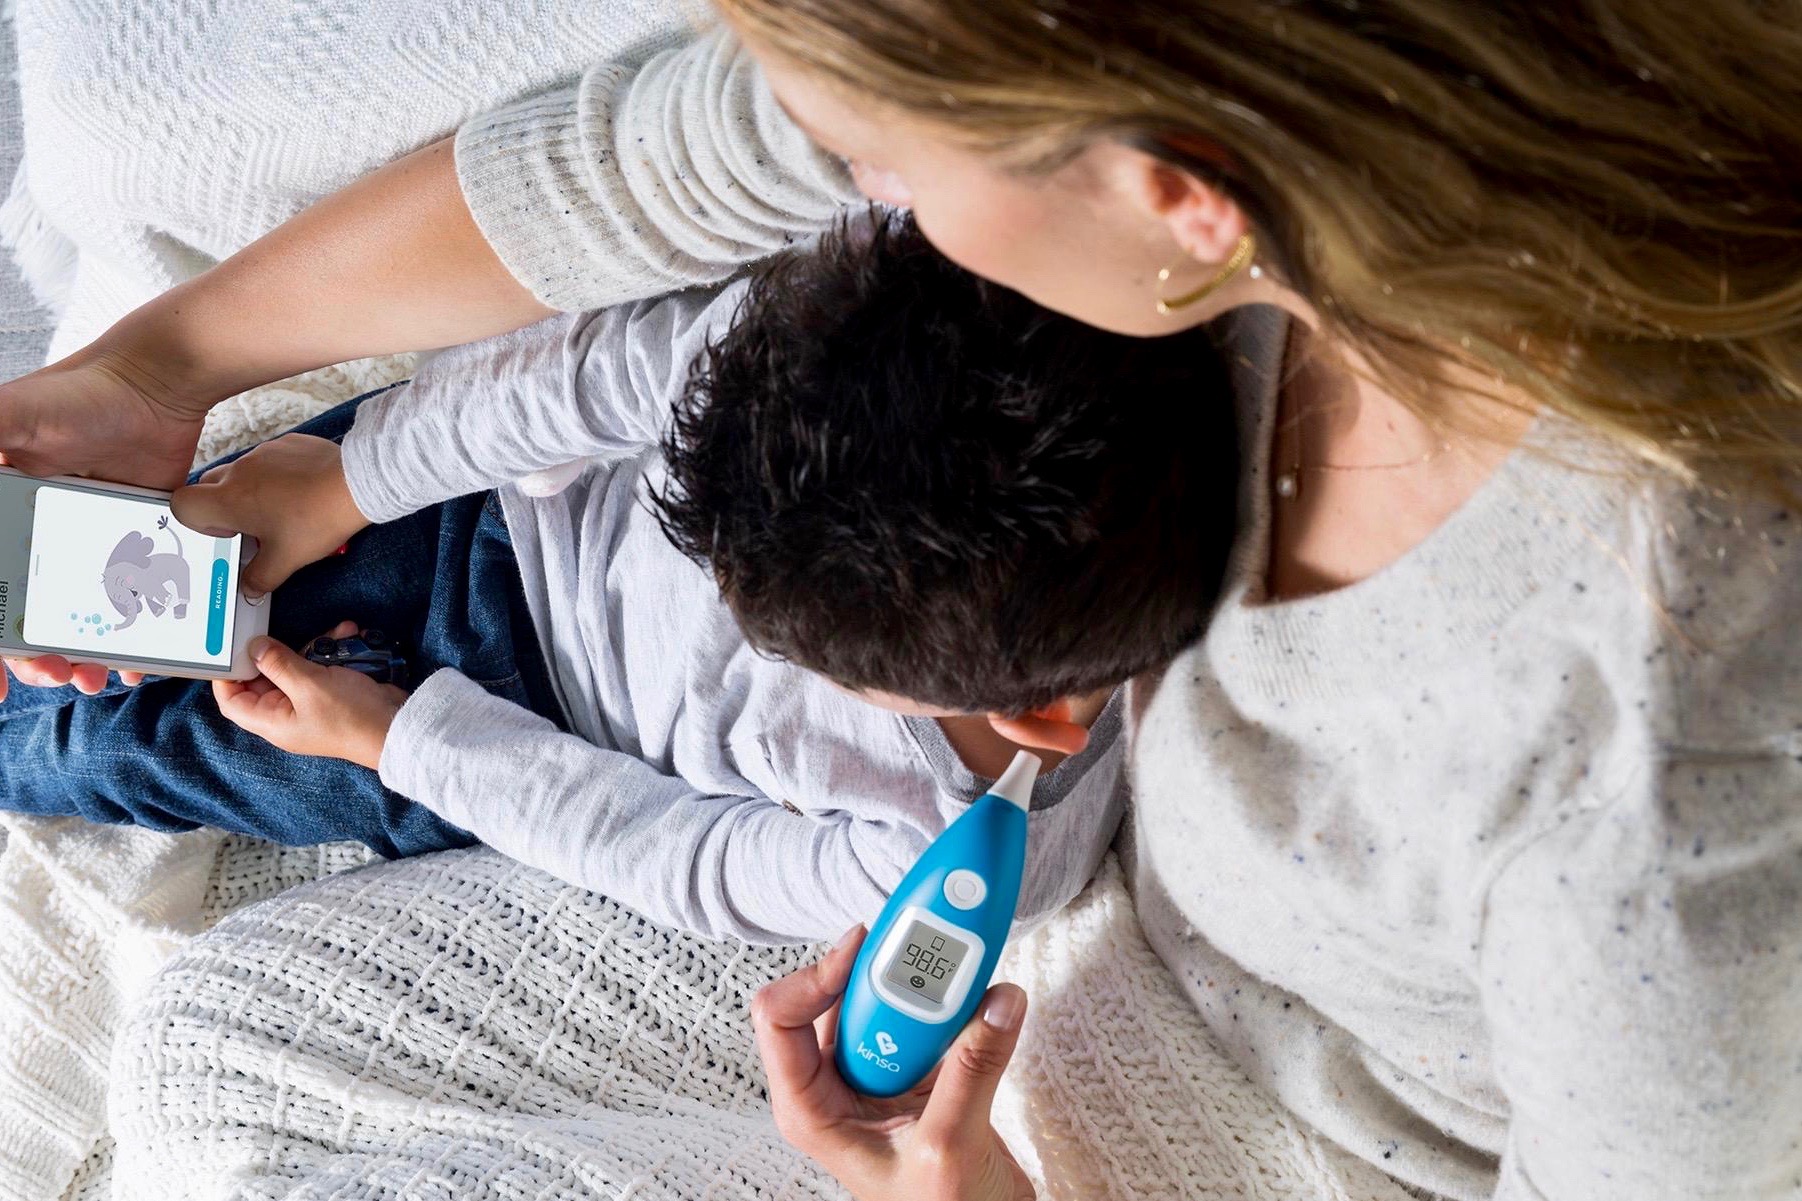 This smart thermometer keeps baby healthy - CNET